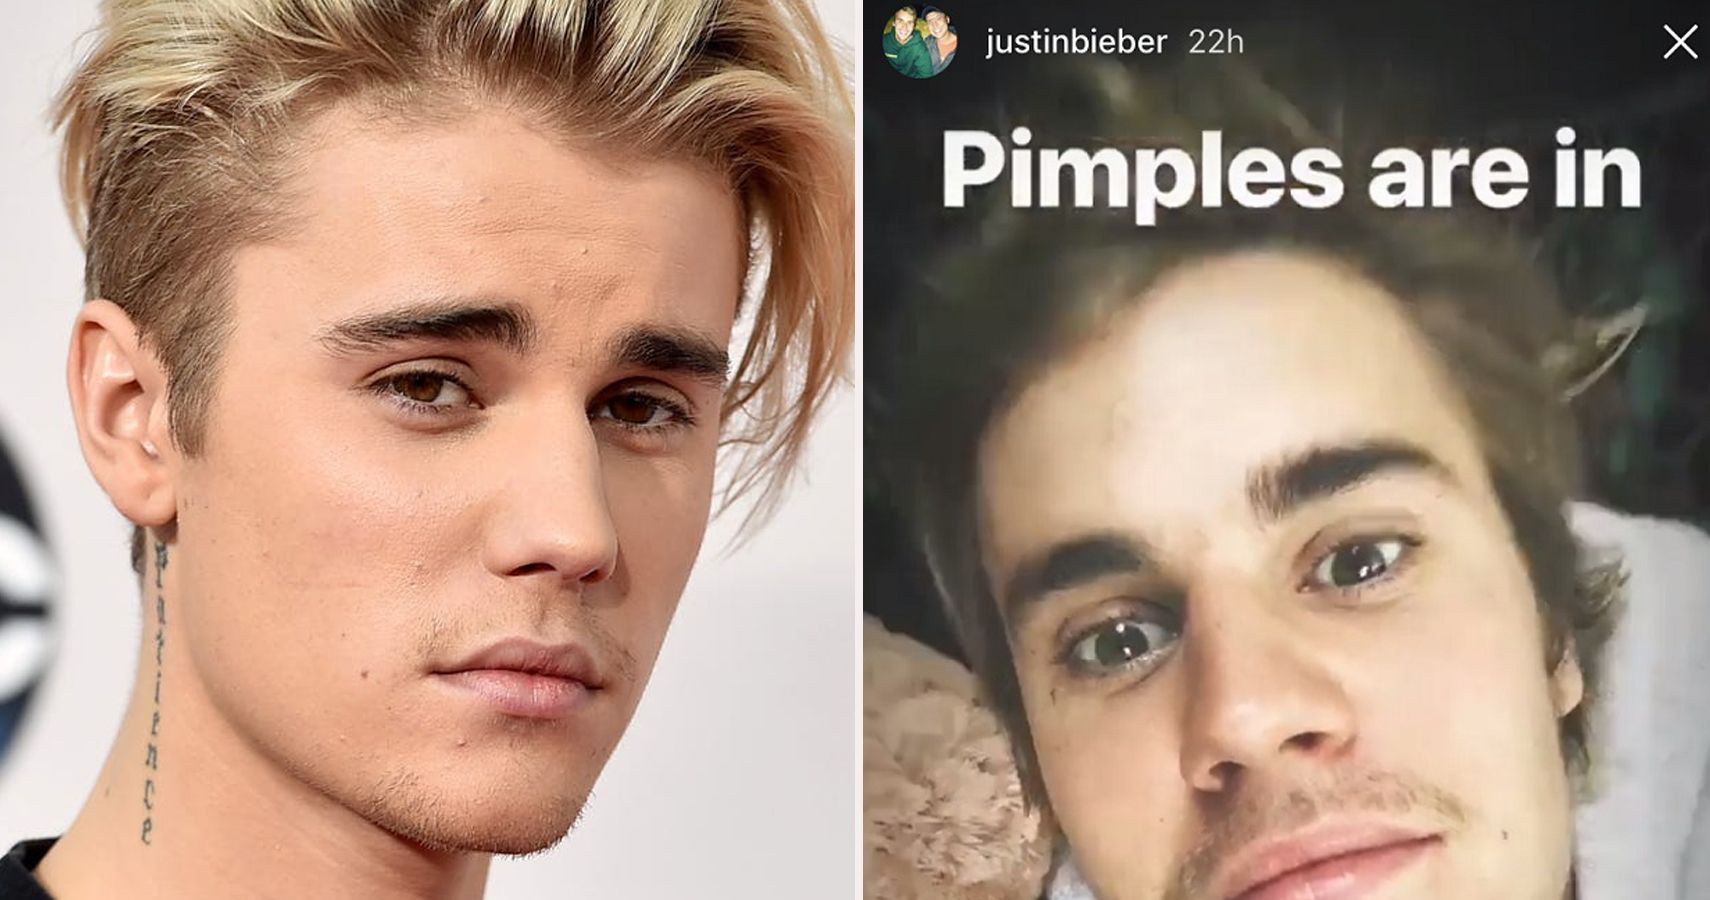 From Pimples To Perfection... How Justin Bieber Got His Skin In Check